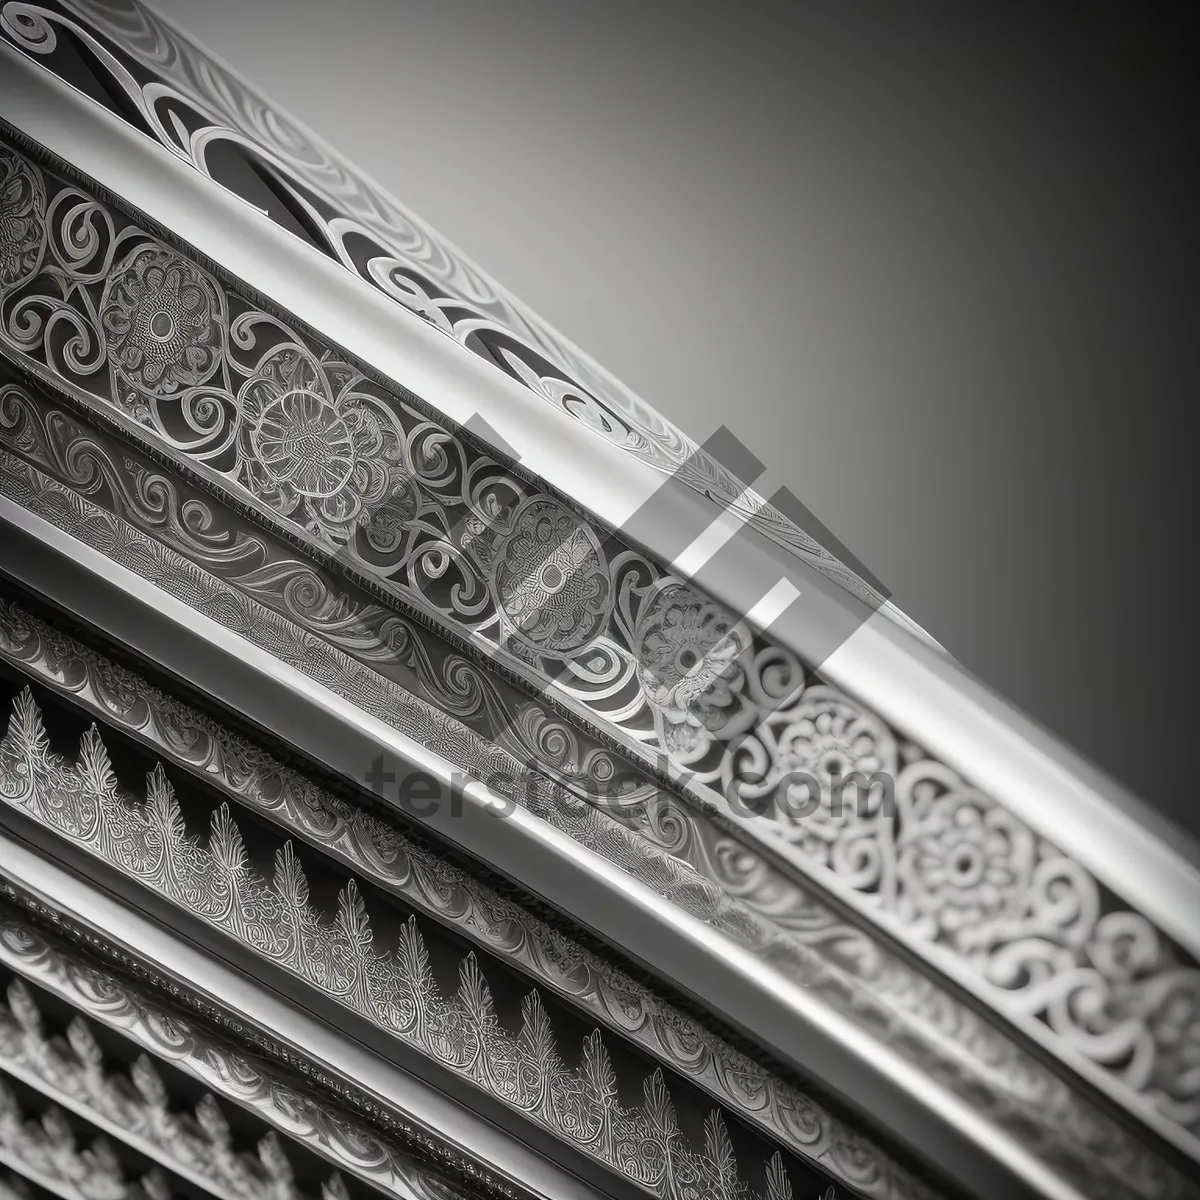 Picture of Arabesque Harmonica: Ornate Musical Instrument in Architectural Setting